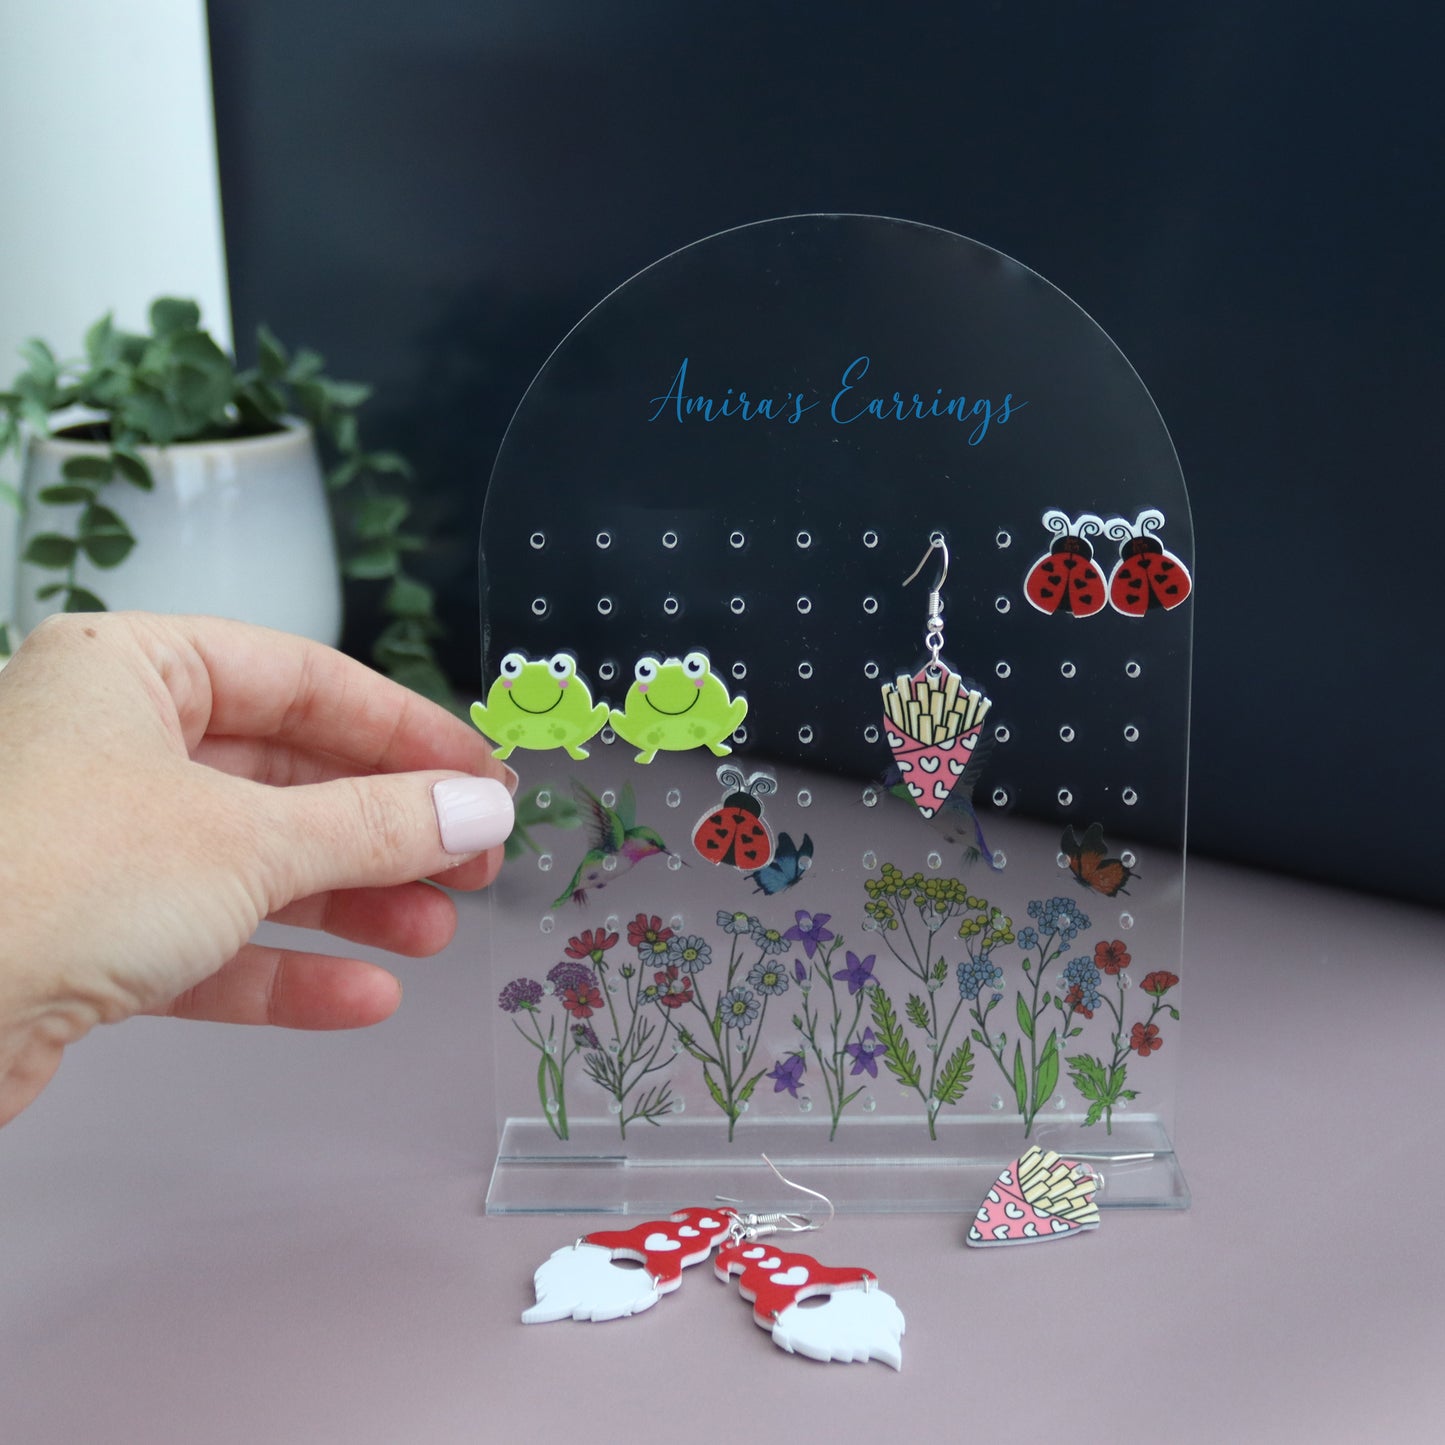 personalised acrylic earring holder can hold 50 sets of earrings